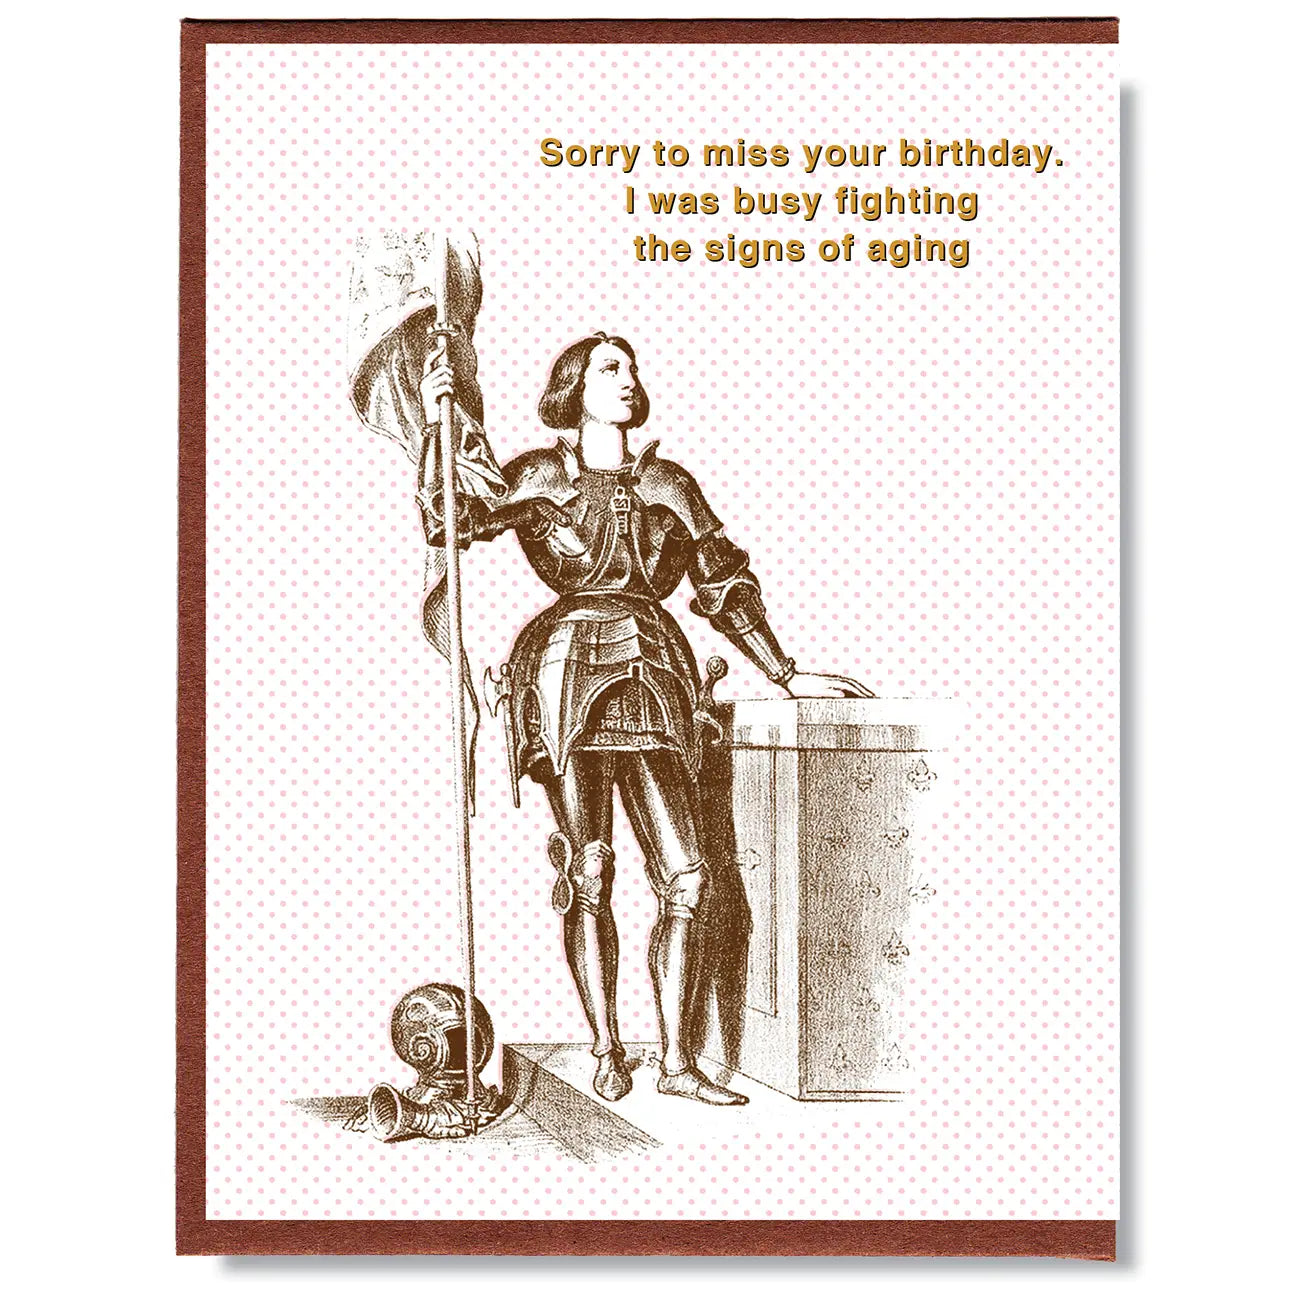 Smitten Kitten Birthday Cards Greeting Cards Smitten Kitten Sorry to miss your birthday I was busy fighting the signs of aging  